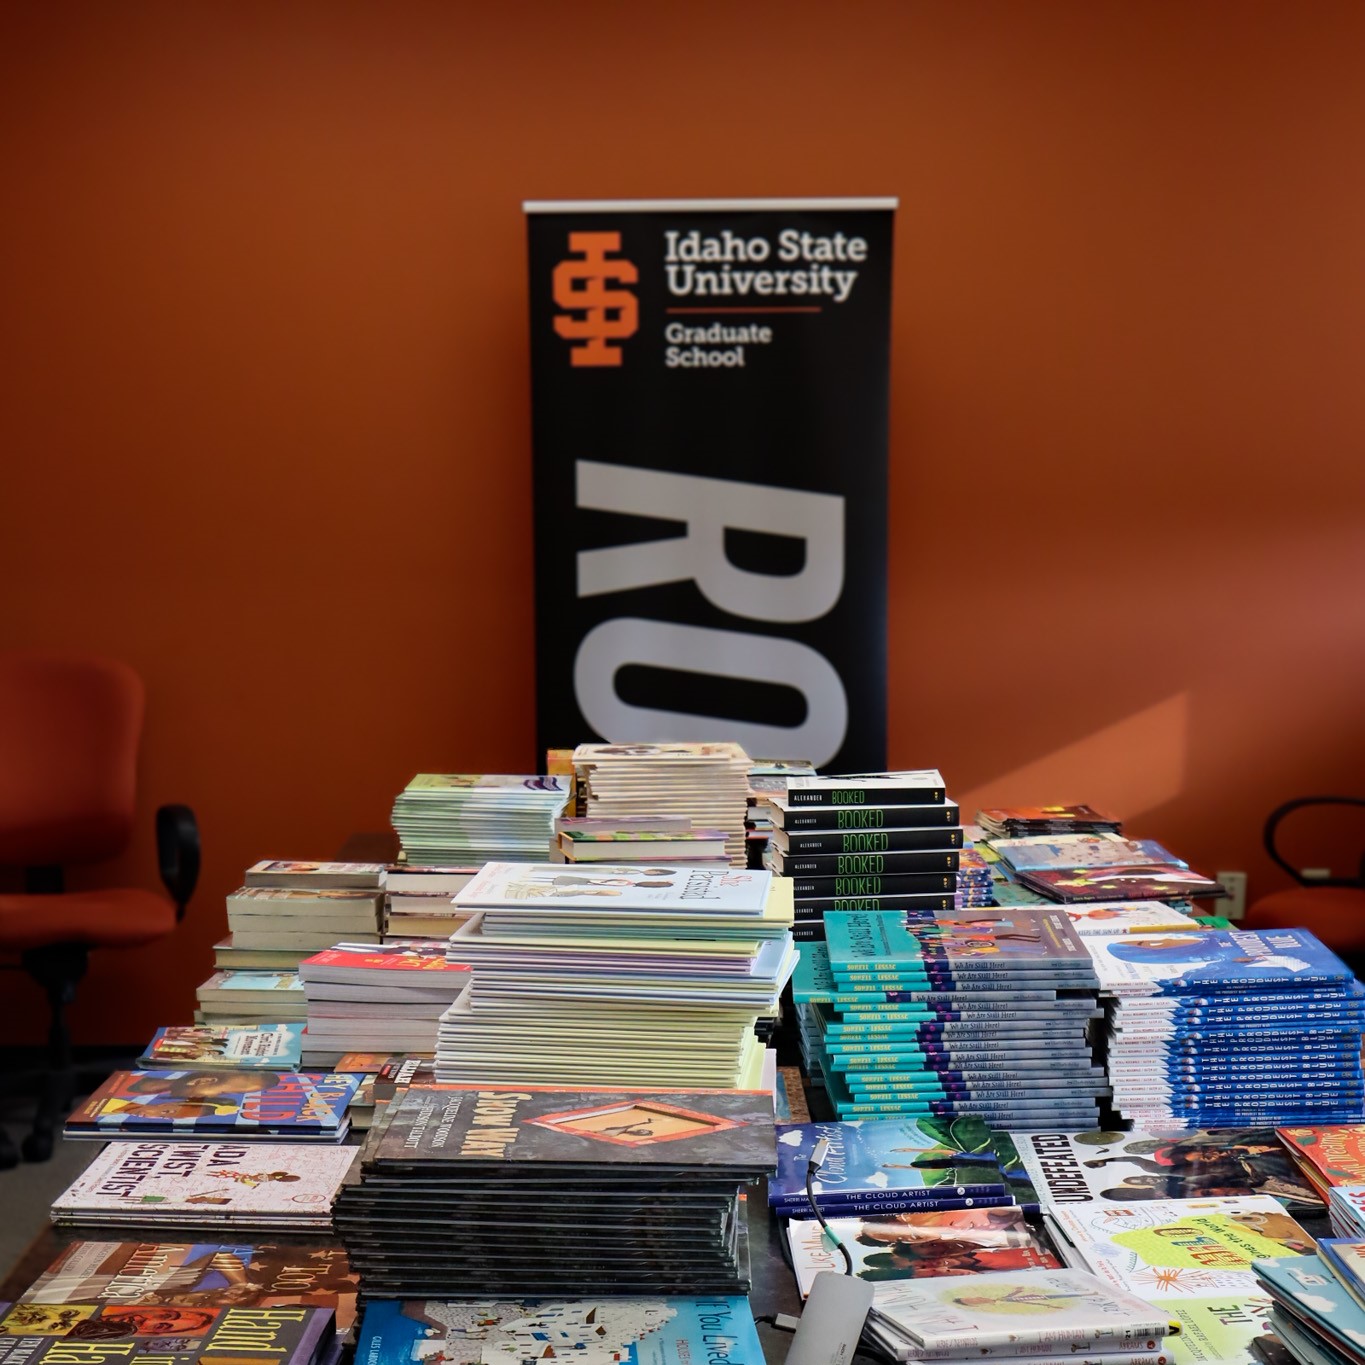 stacks of books donated for the Graduate School book drive, with ROAR banner in background